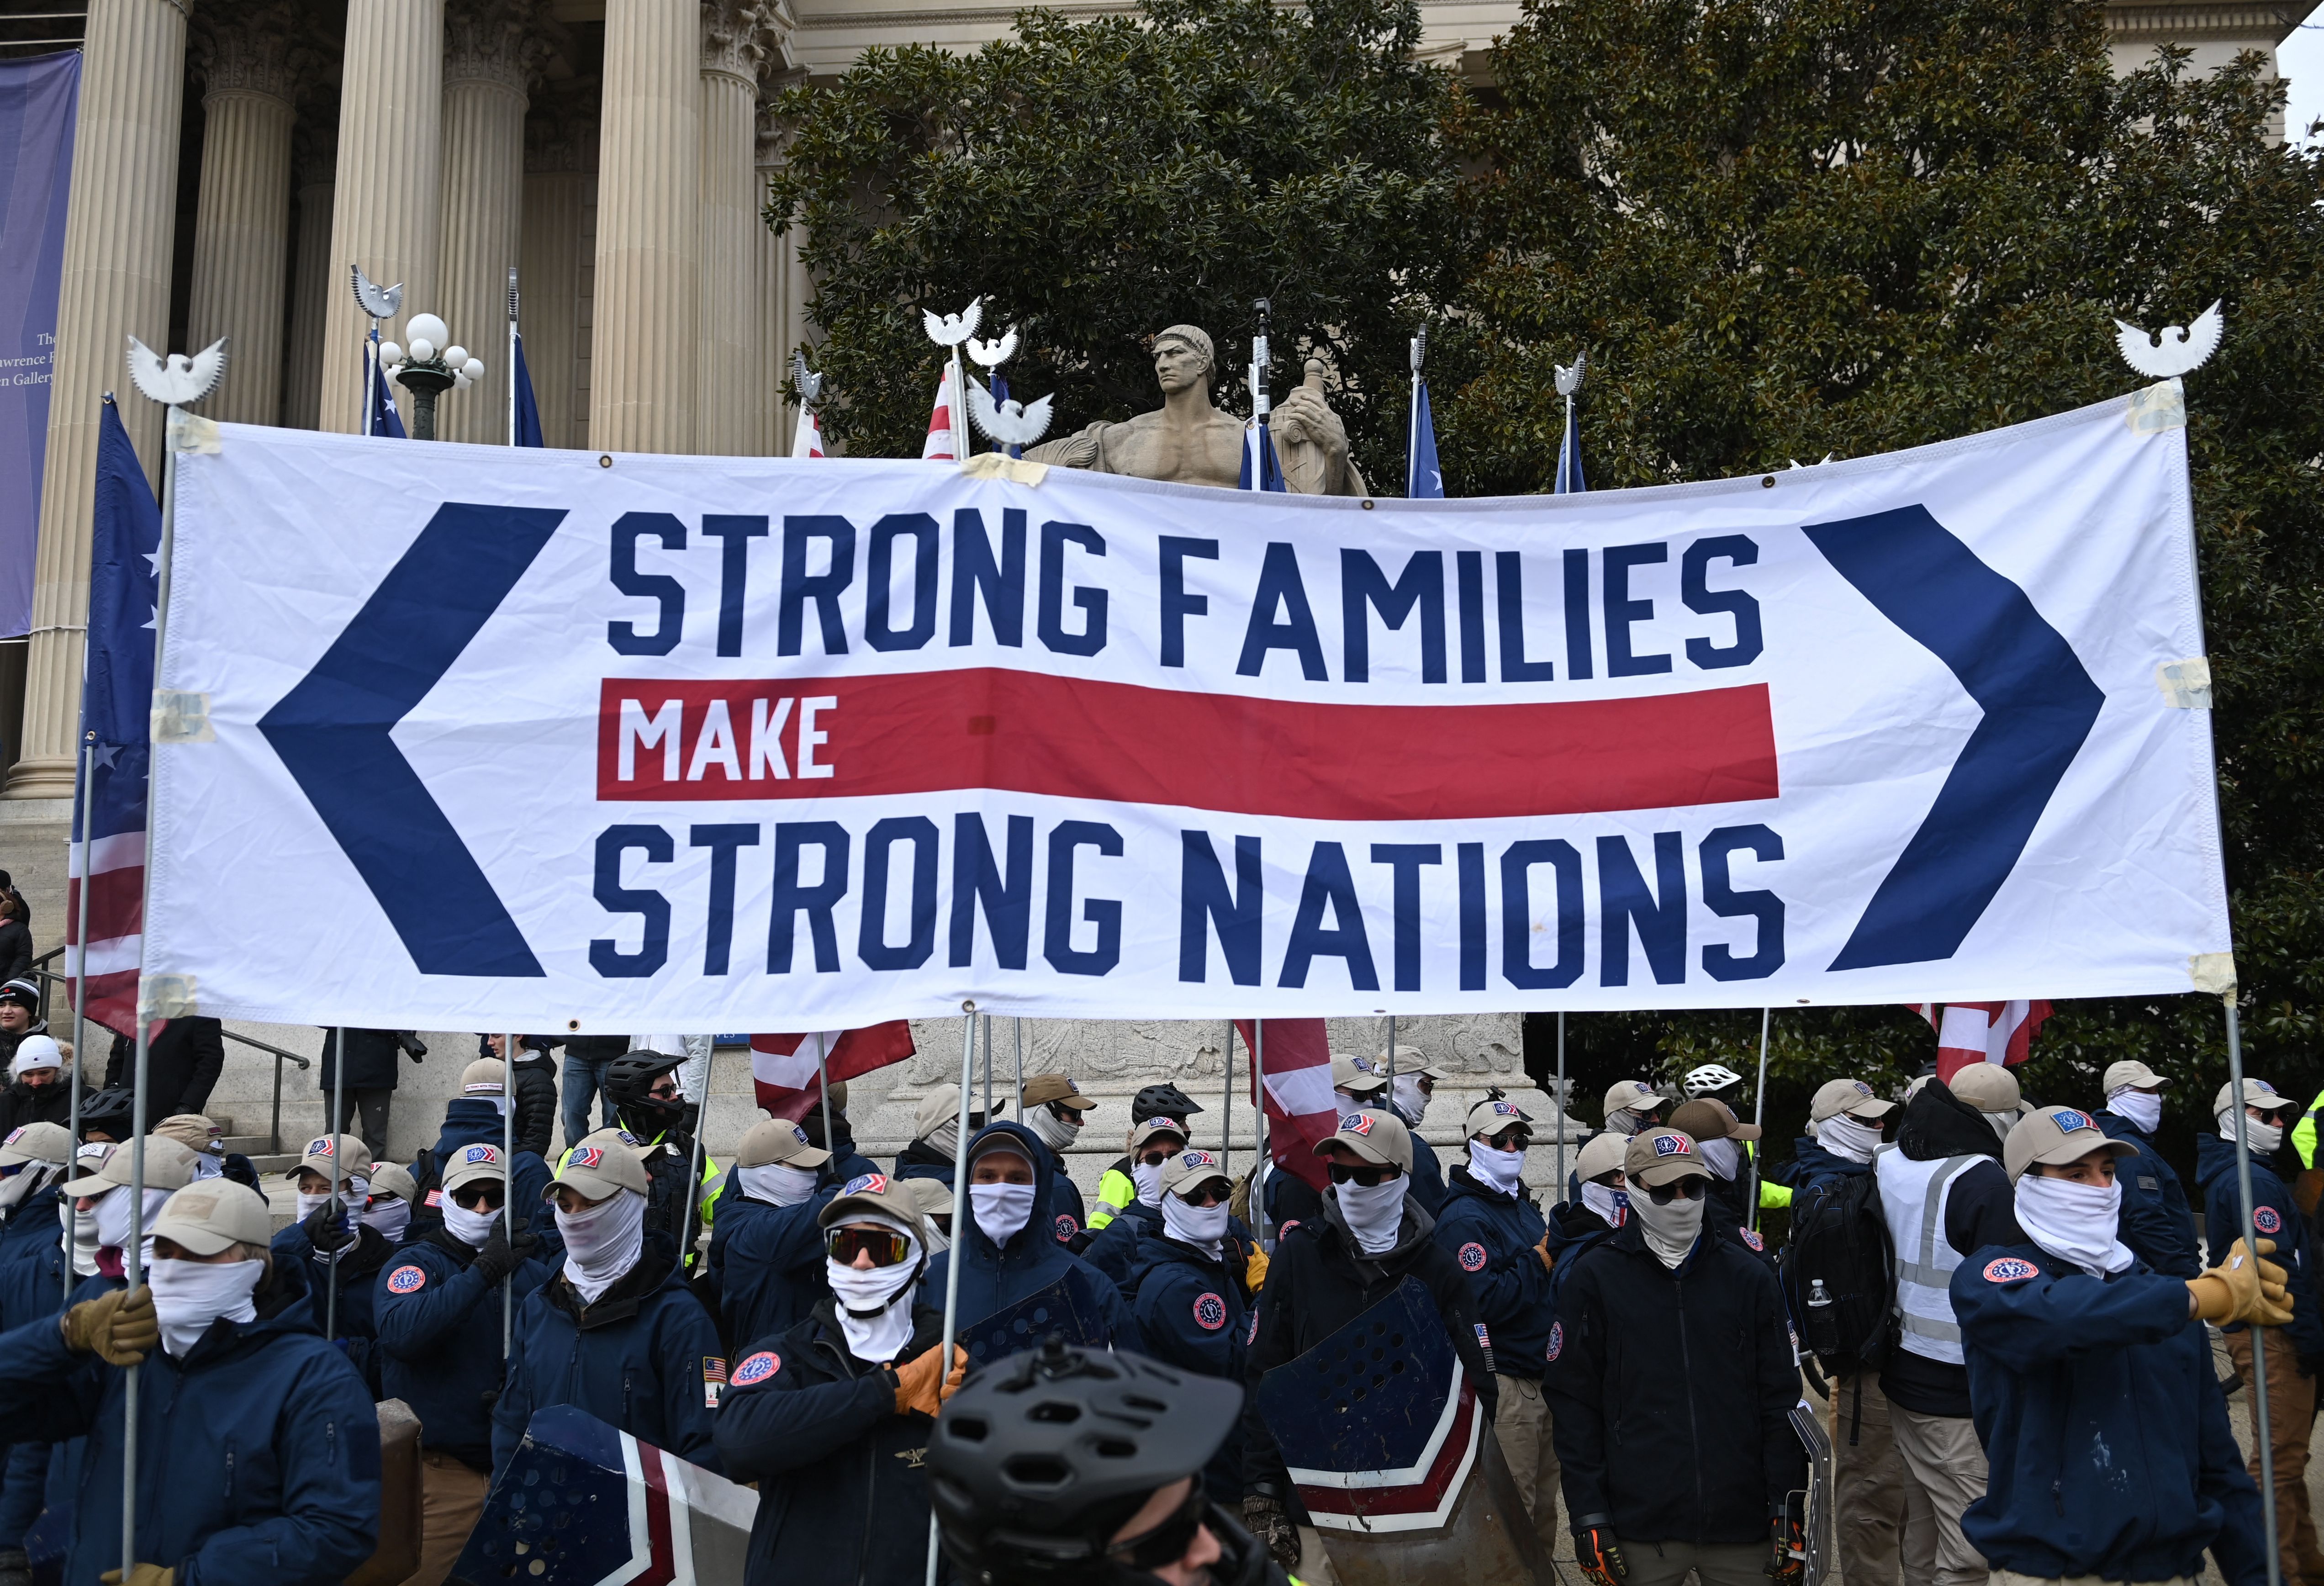 Photo of a group of people wearing masks and holding a banner that says "Strong families make strong nations"